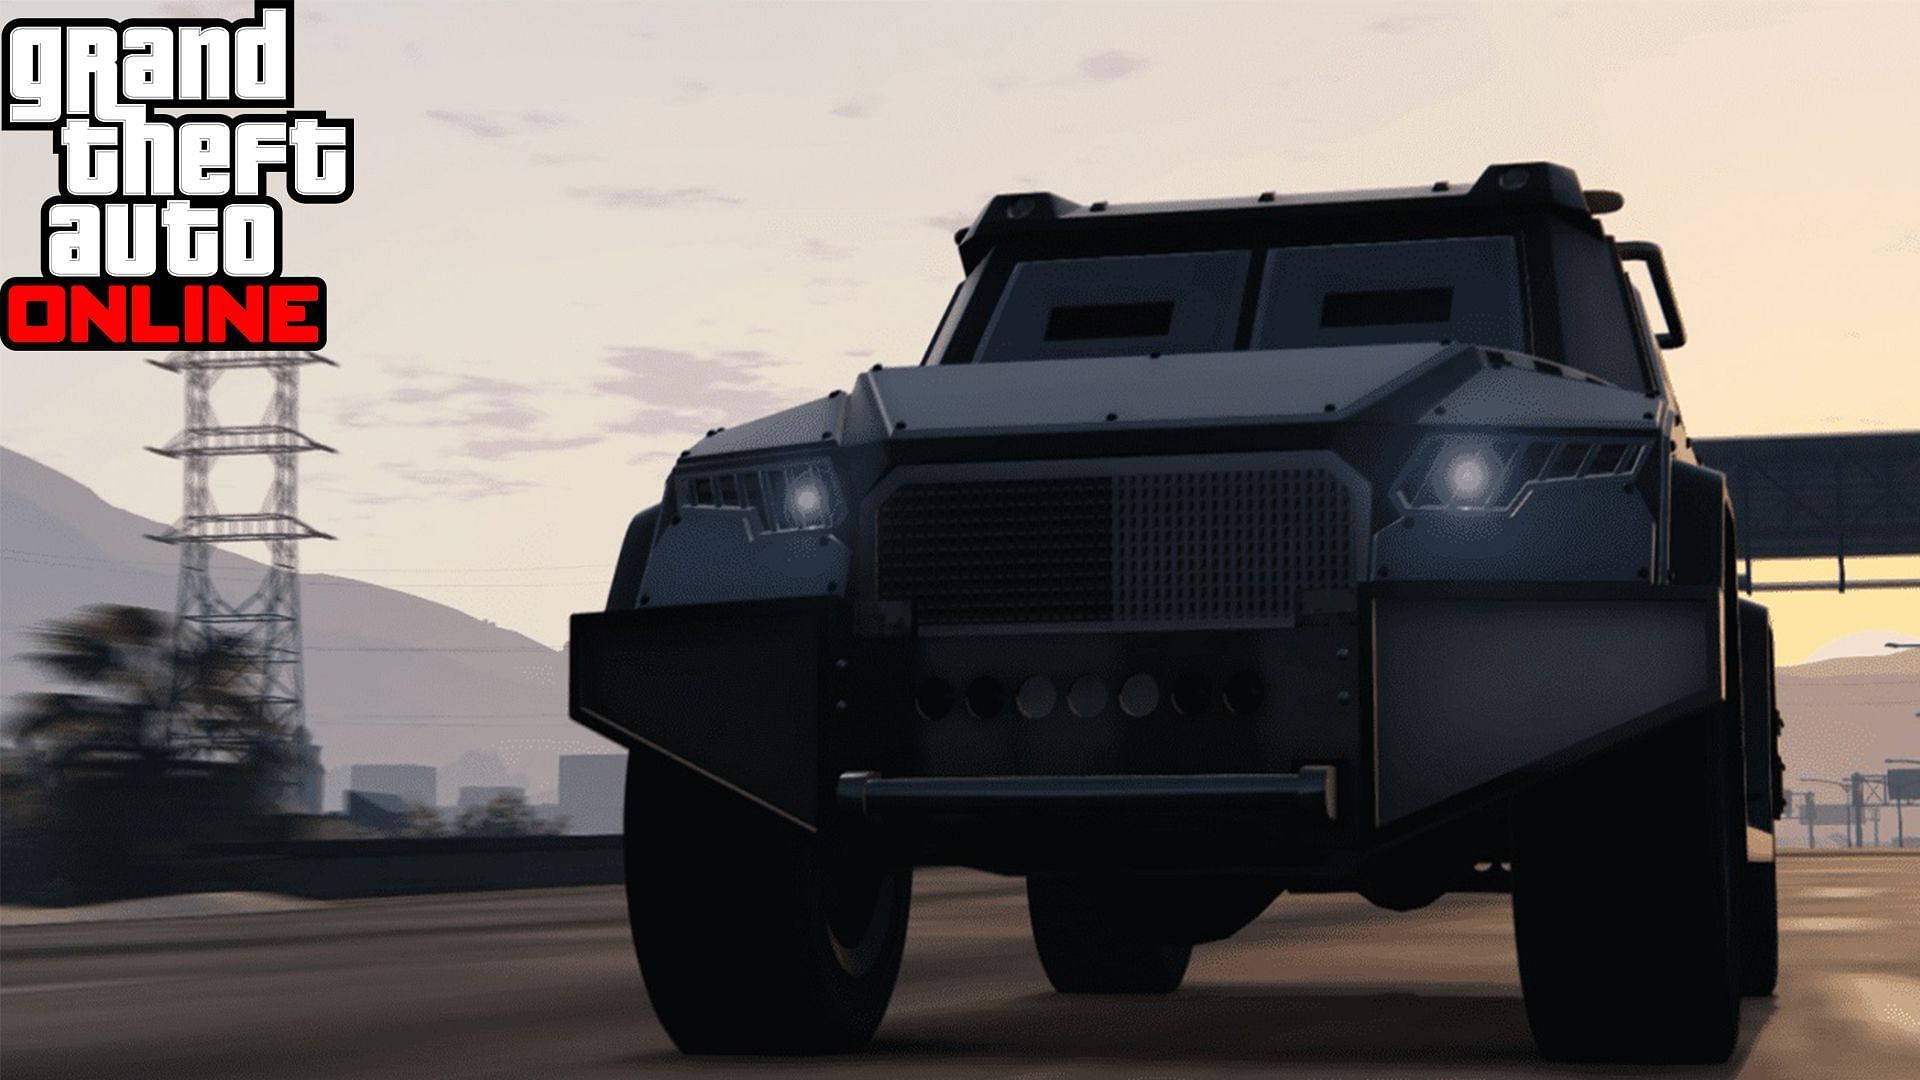 GTA Online public lobbies are a warzone and armored vehicles are the meta (Image via Sportskeeda)